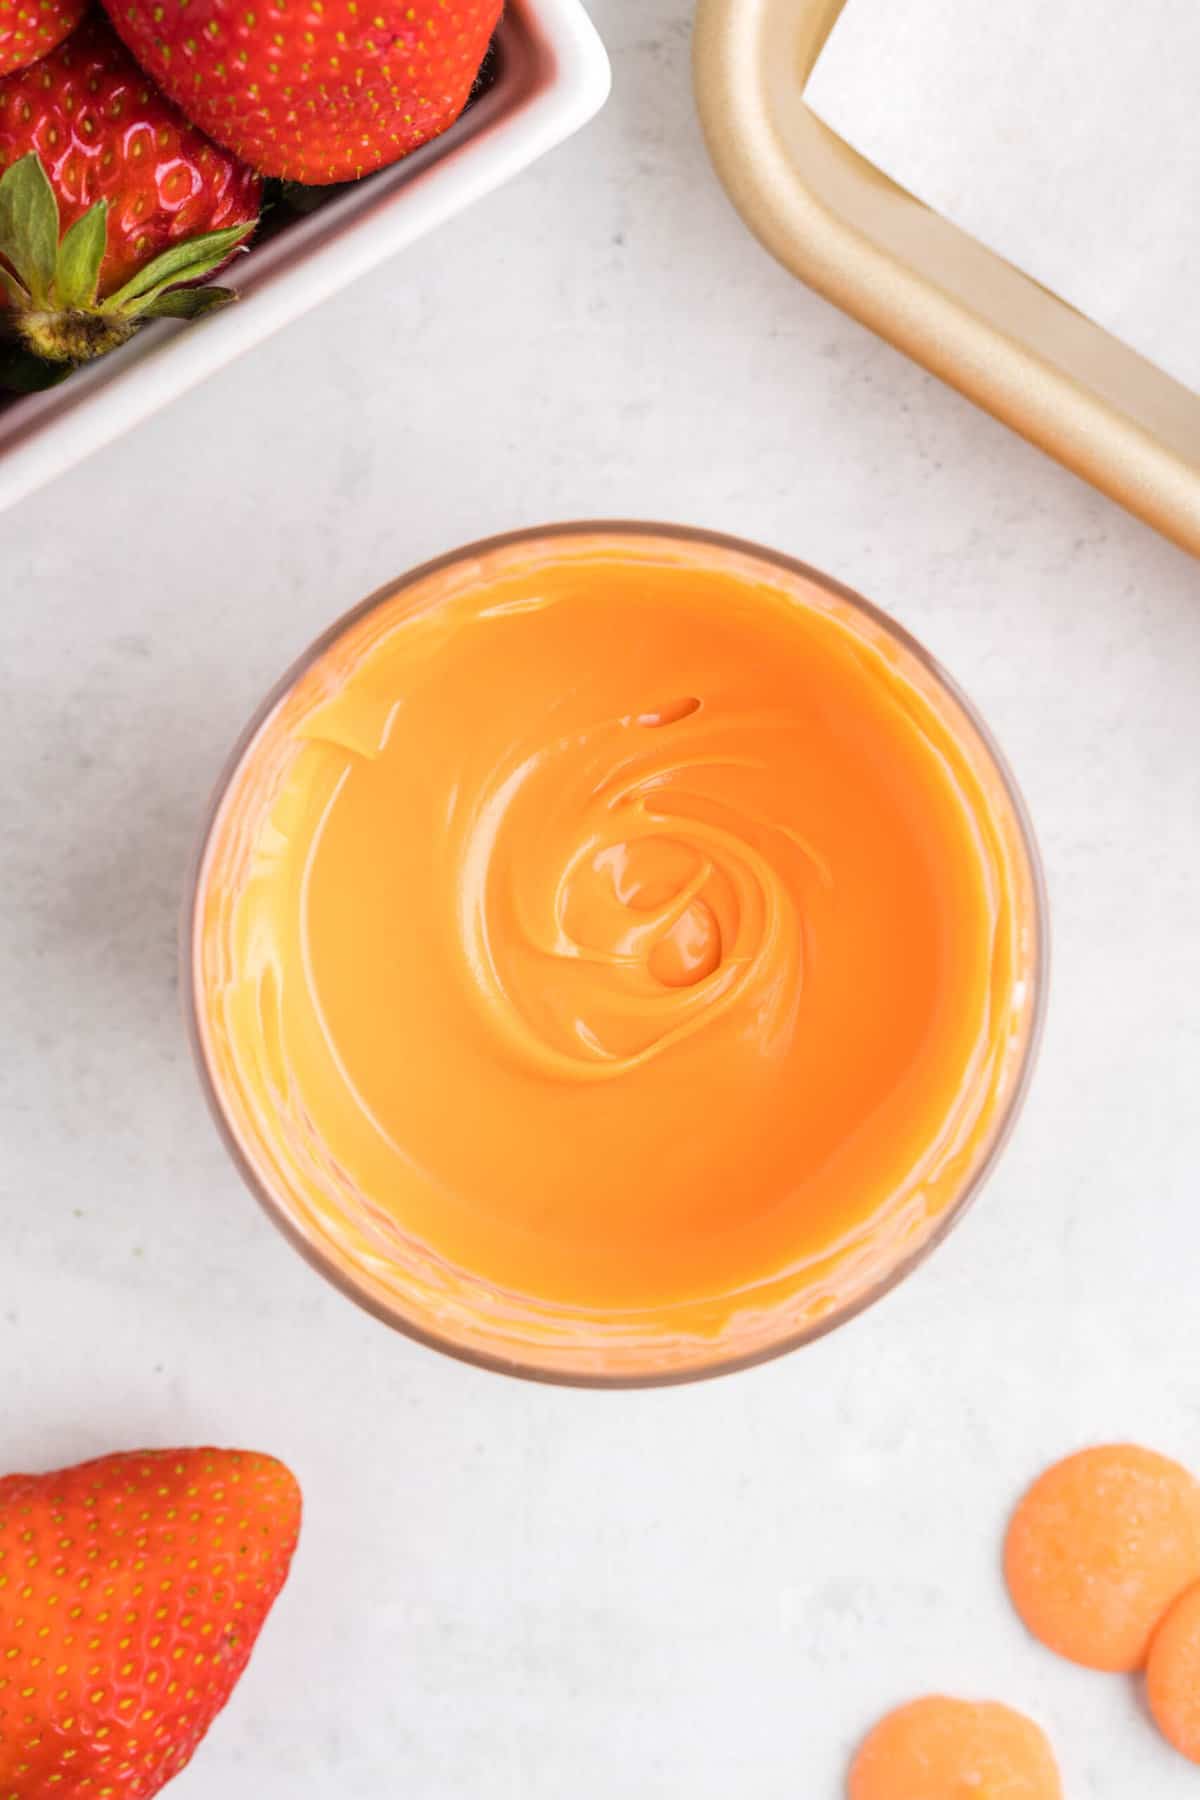 Melted orange candy melts in a bowl.